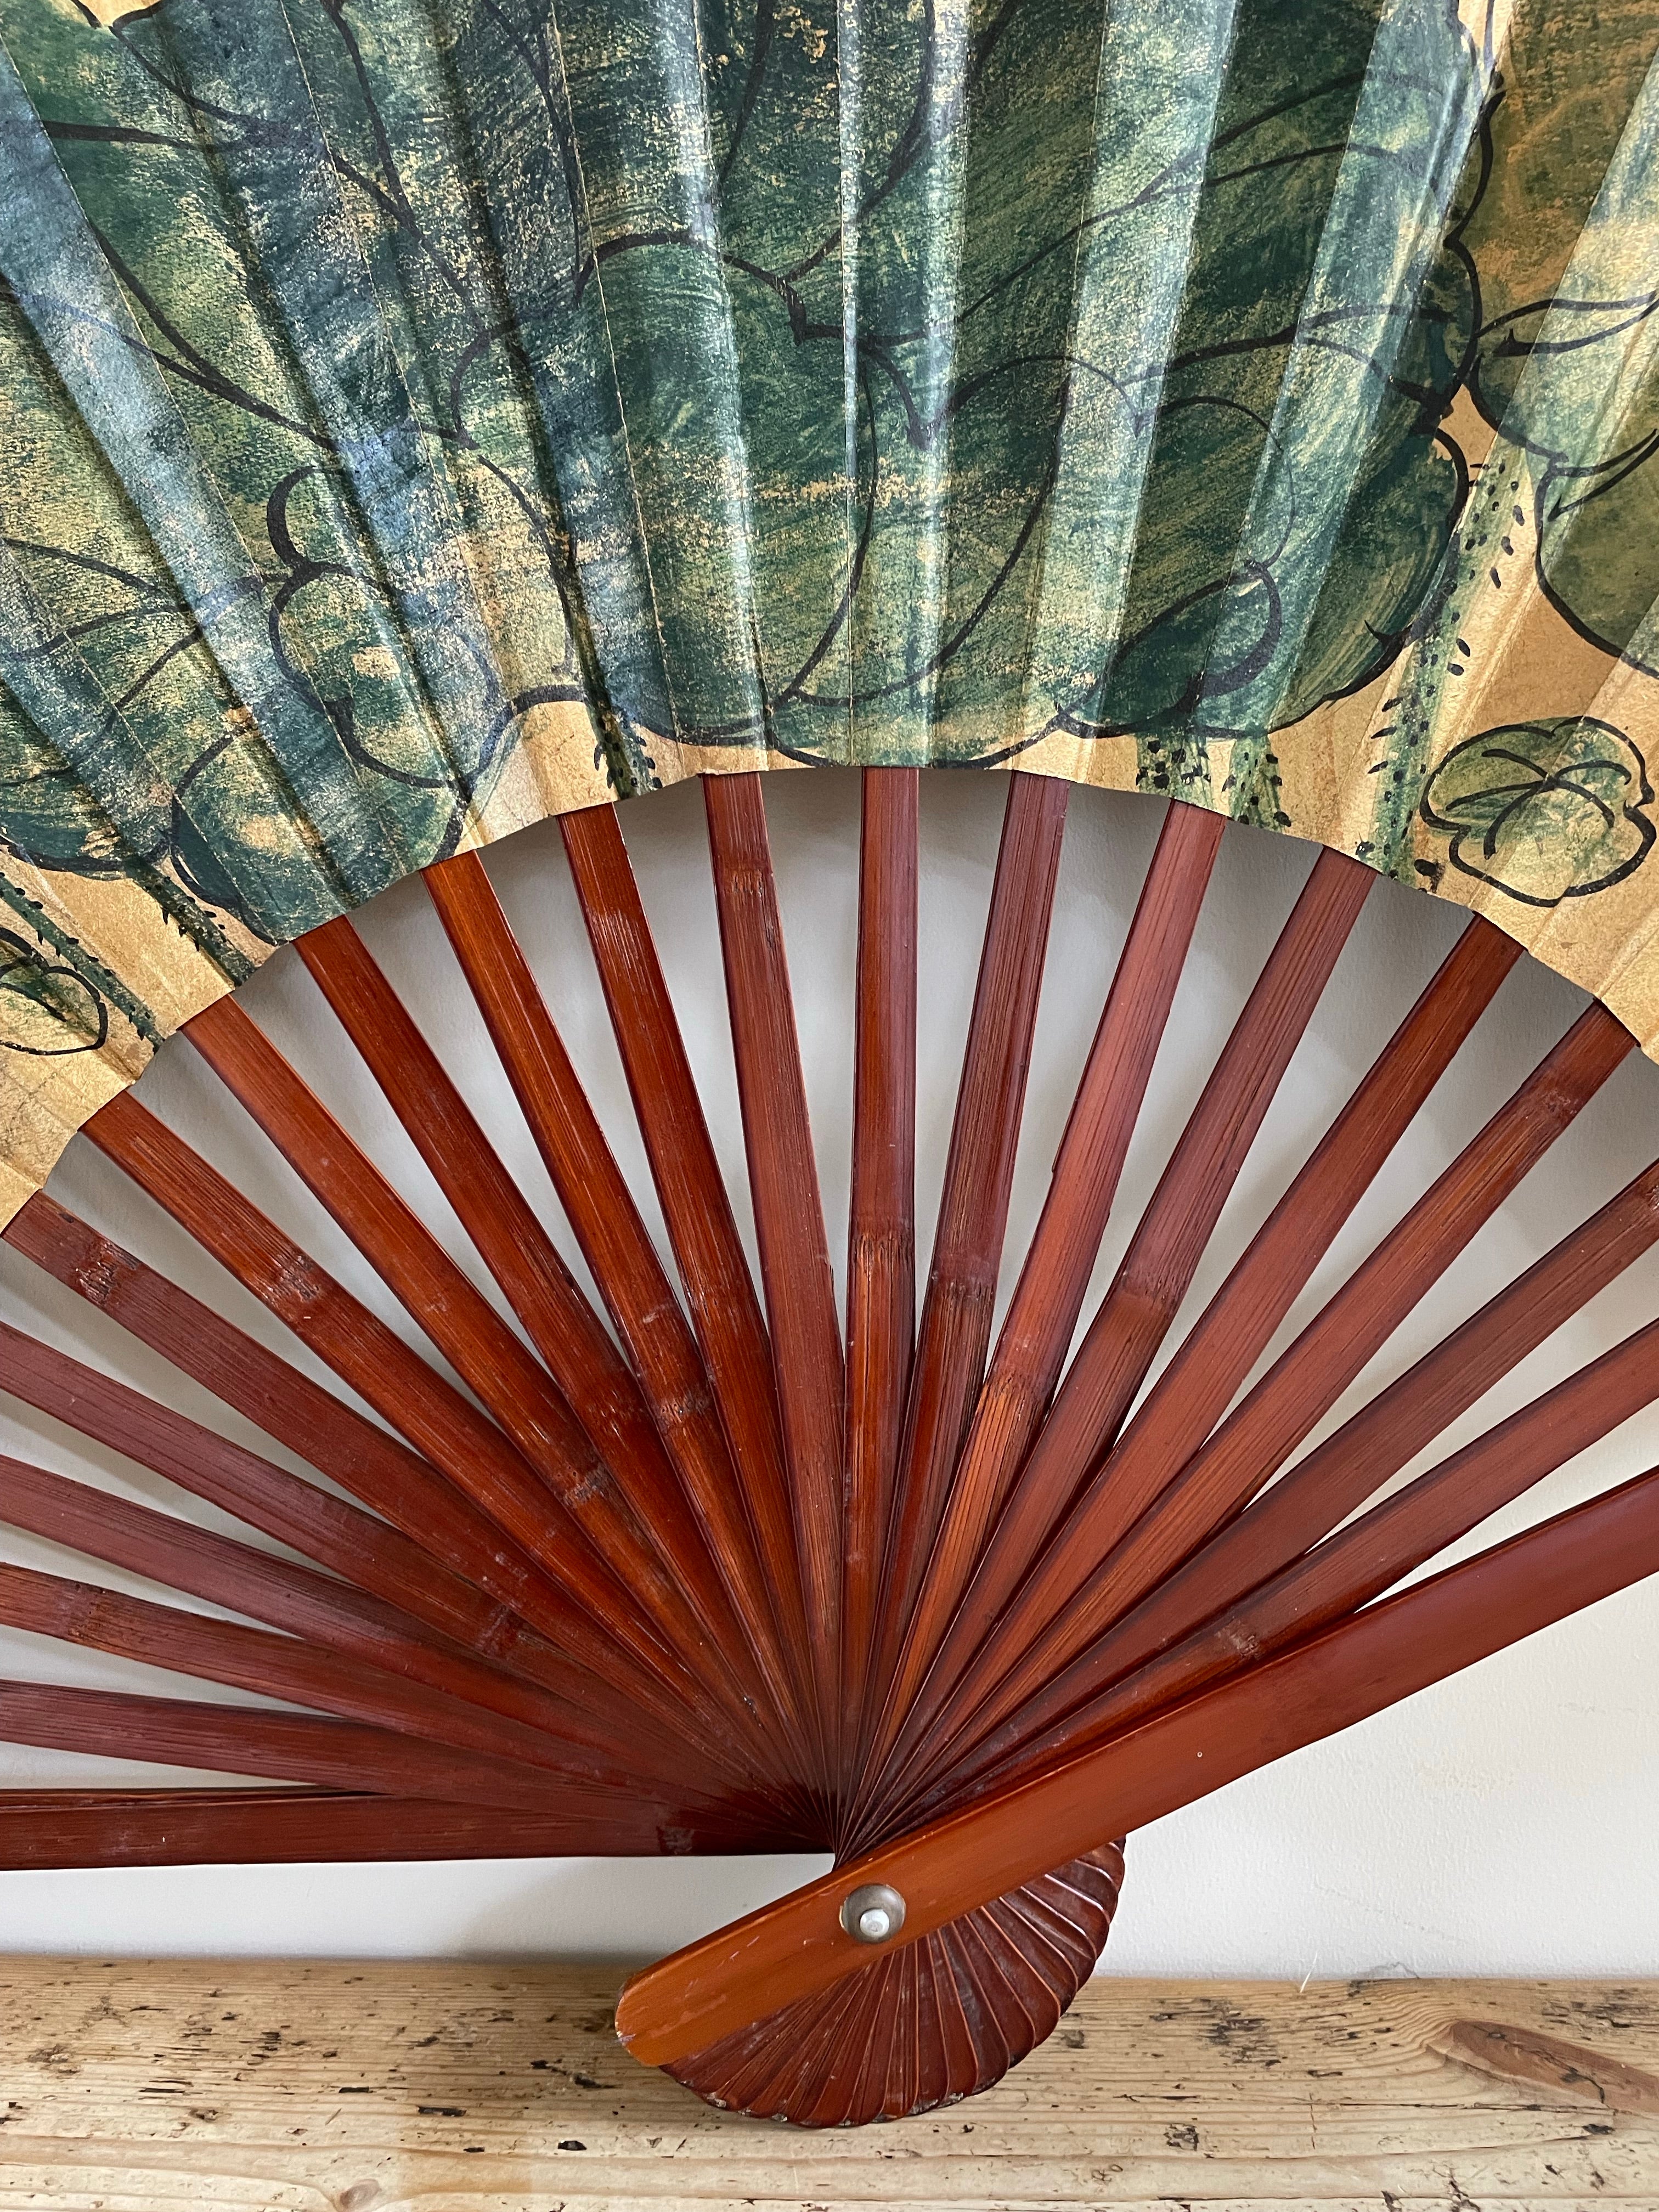 Large Vintage Chinese Handpainted Silk Fan for Wall Decor